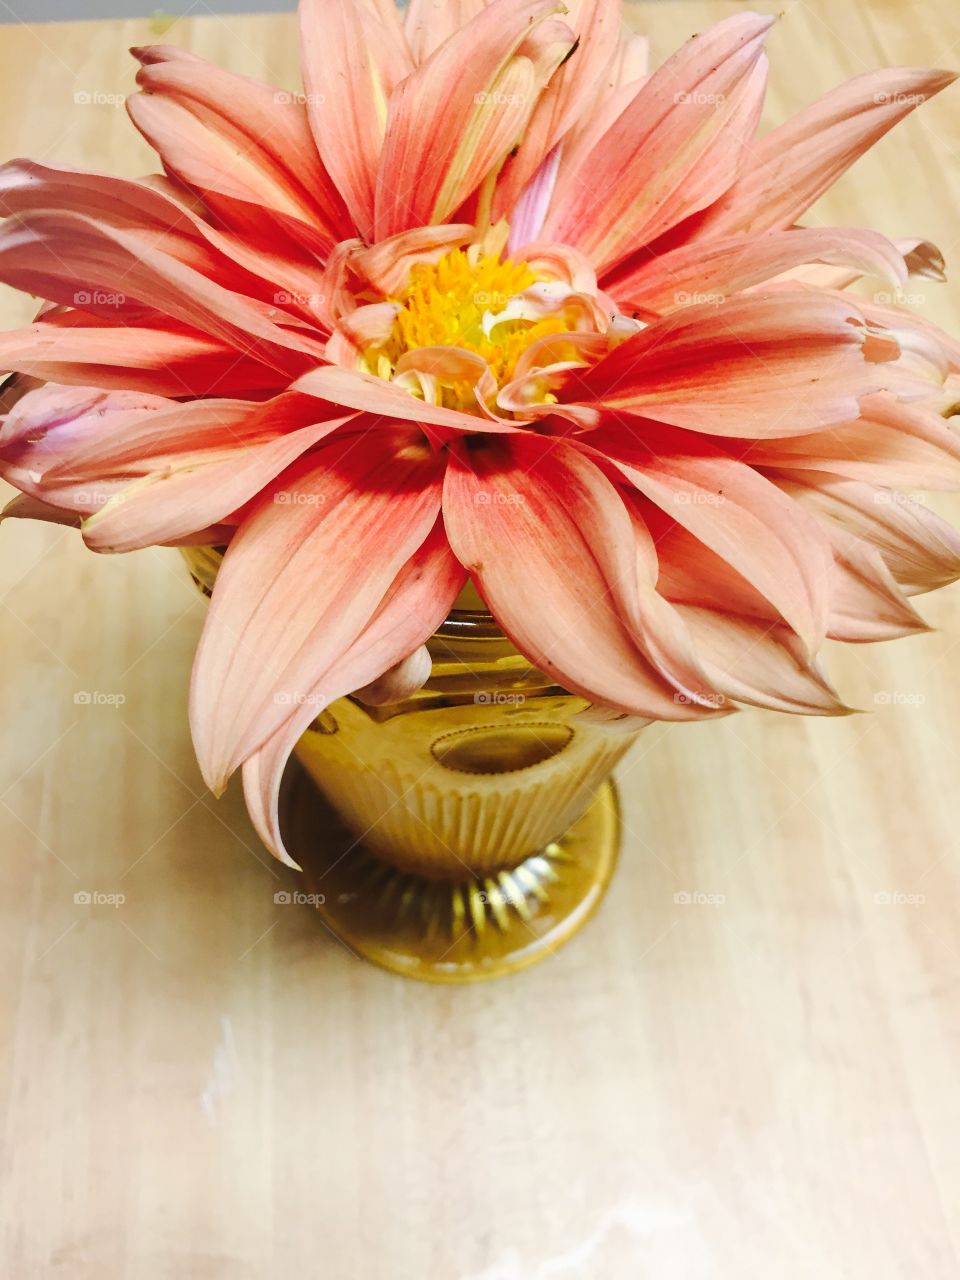 Big beautiful closeup of a large peach colored Dahlia flower in an amber glass. 